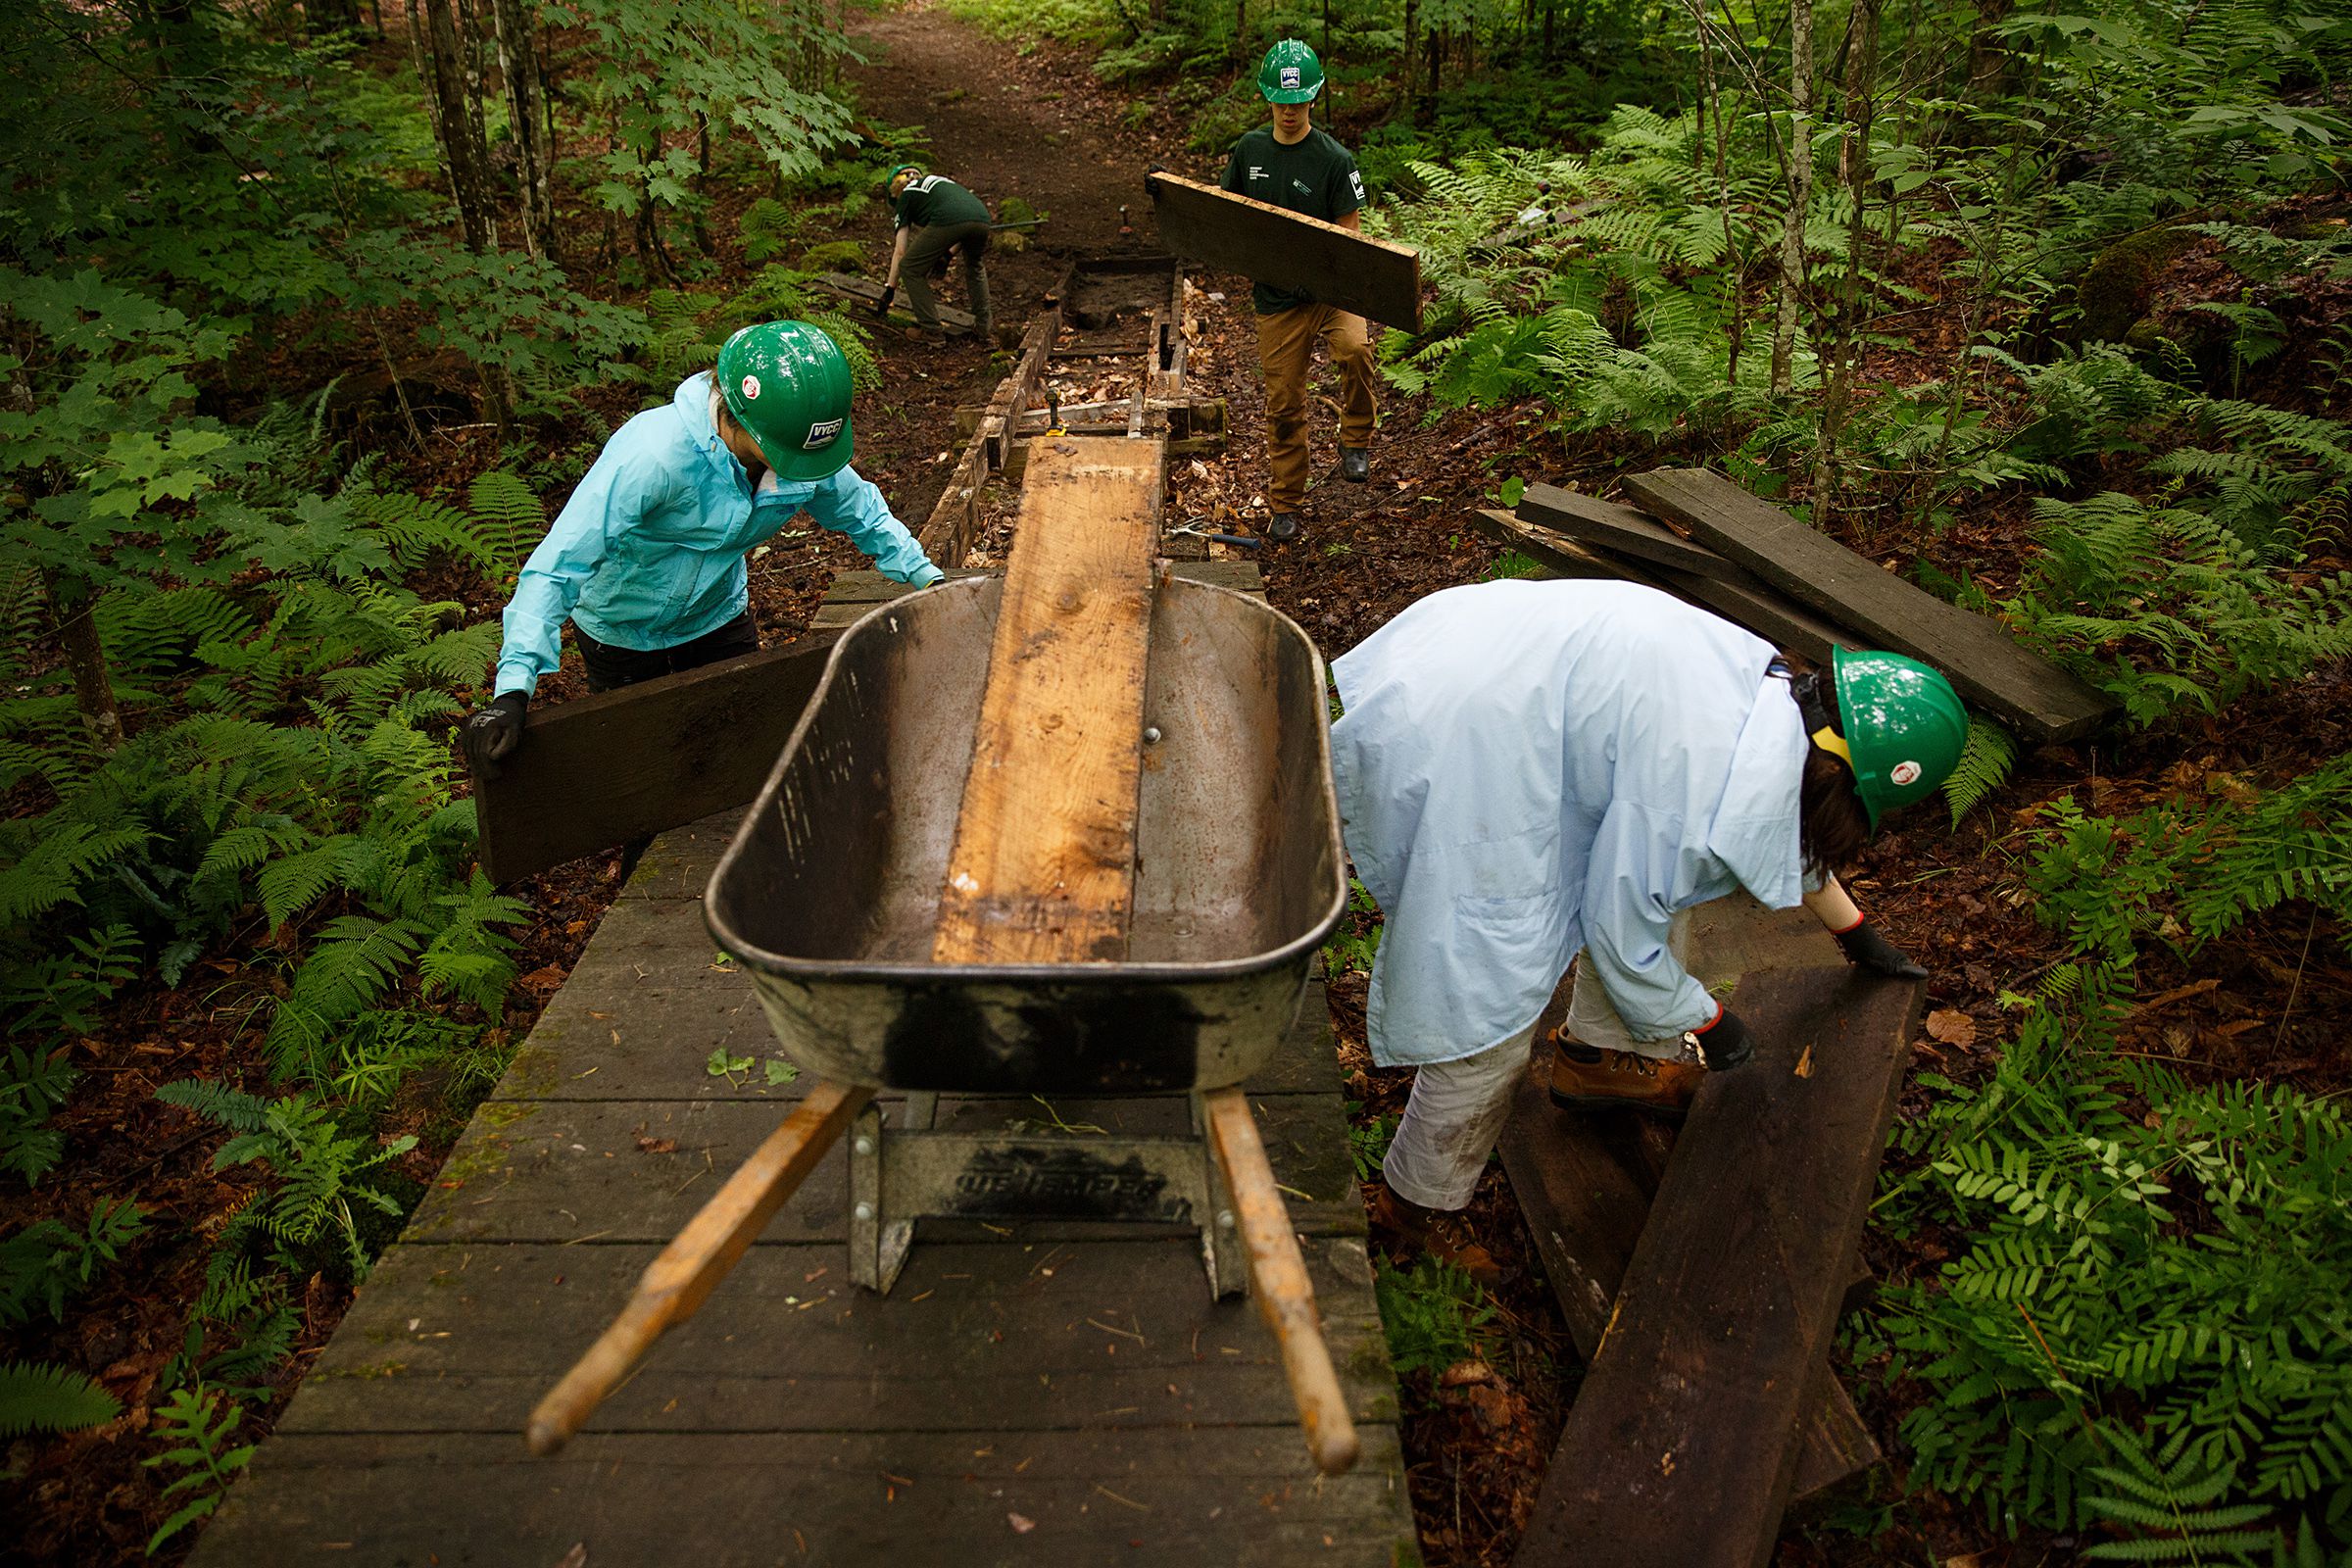 Vermont Youth Conservation Corps members, from left, Chloe Masillo, 15, of Pittsfield, Vt., Andries Morin, 16, of Pittsfield, Vt., Ben Johnsen, 15, of Pomfret, Vt., and  Beatrix Garza, 15, of Woodstock, Vt., work to replace a footbridge near the Prosper Trail trailhead at Marsh-Billings-Rockefeller National Historic Park in Woodstock, Vt., on Tuesday, June 22, 2021. (Valley News / Report For America - Alex Driehaus) Copyright Valley News. May not be reprinted or used online without permission. Send requests to permission@vnews.com.